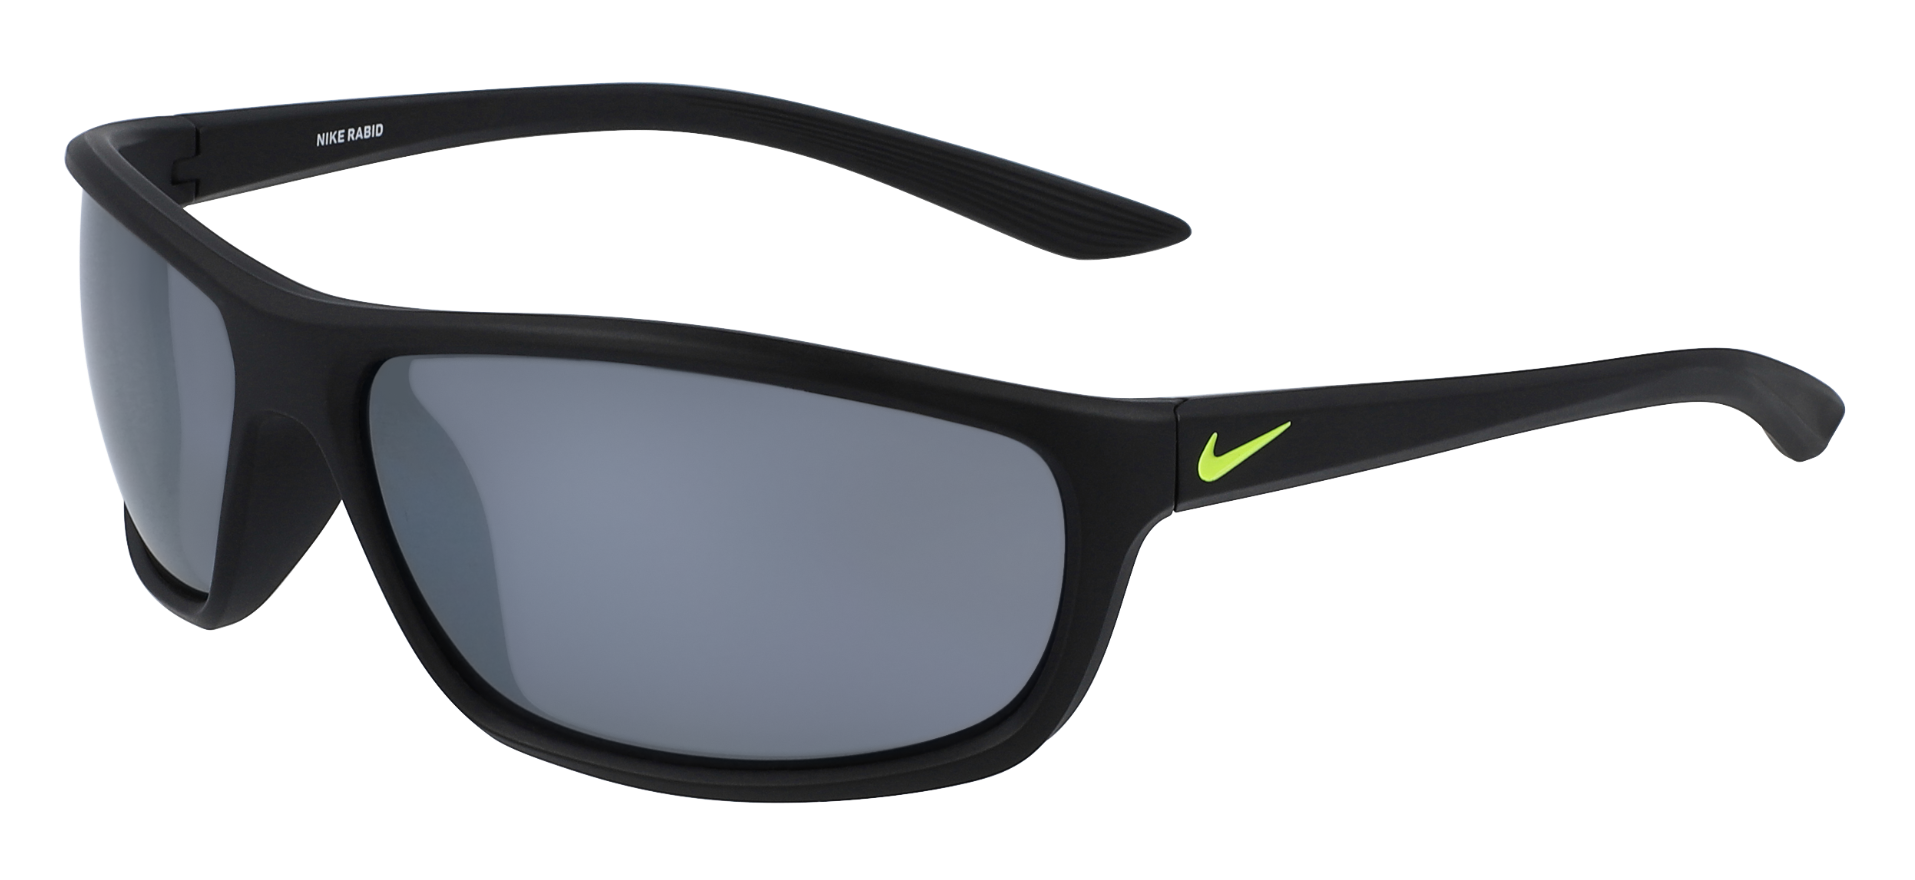 Nike Rabid 2 sunglasses in matte black with green Nike logo on temple. Silver rectangular lenses in a wraparound design.